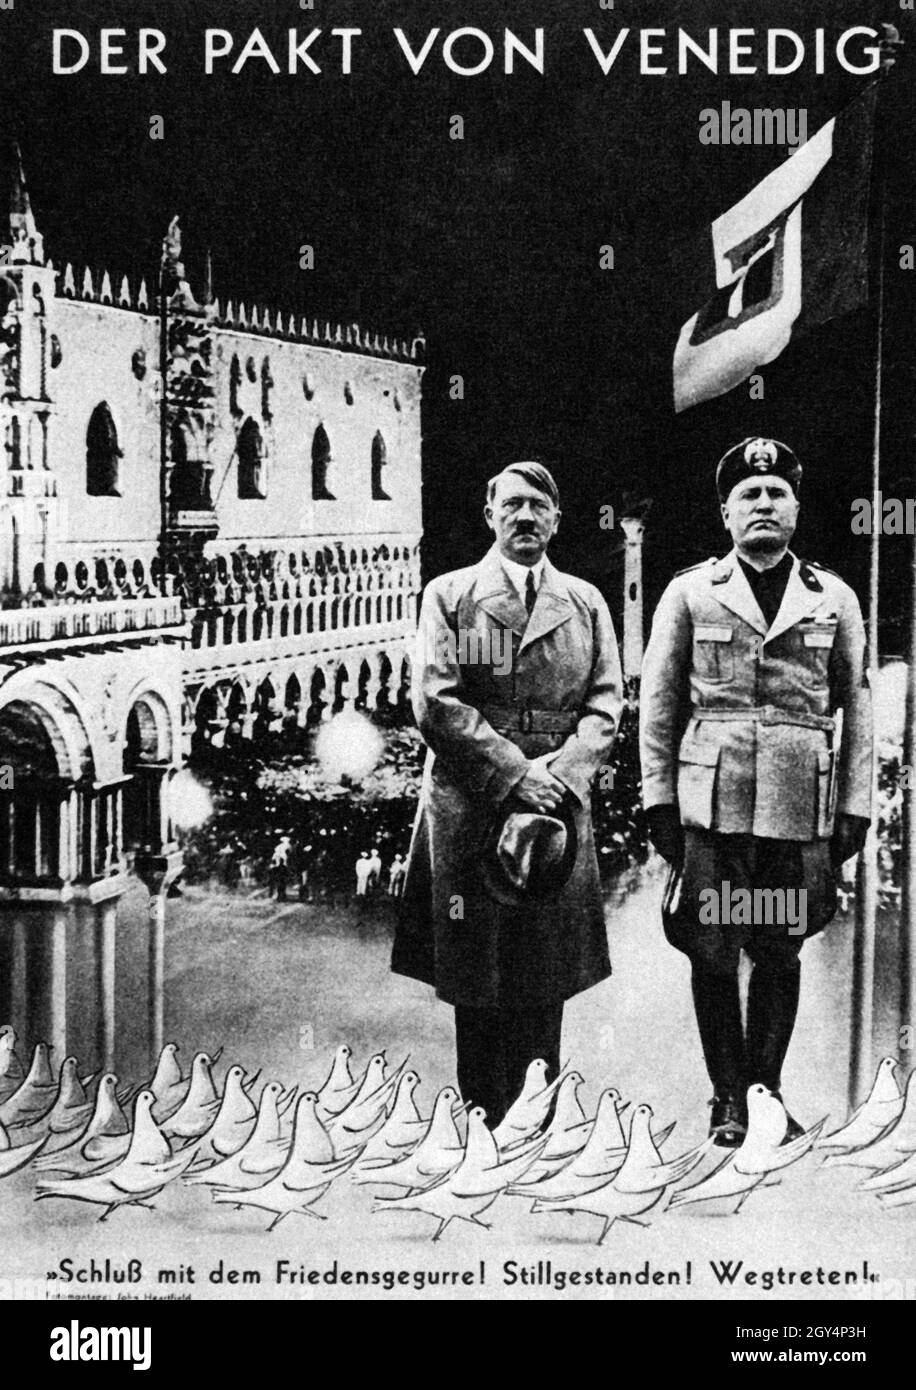 A photomontage of the Prague exile newspaper Arbeiter Illustrierte Zeitschrift caricatures Benito Mussolini and Adolf Hitler, who met for the first time in Venice in June. [automated translation] Stock Photo